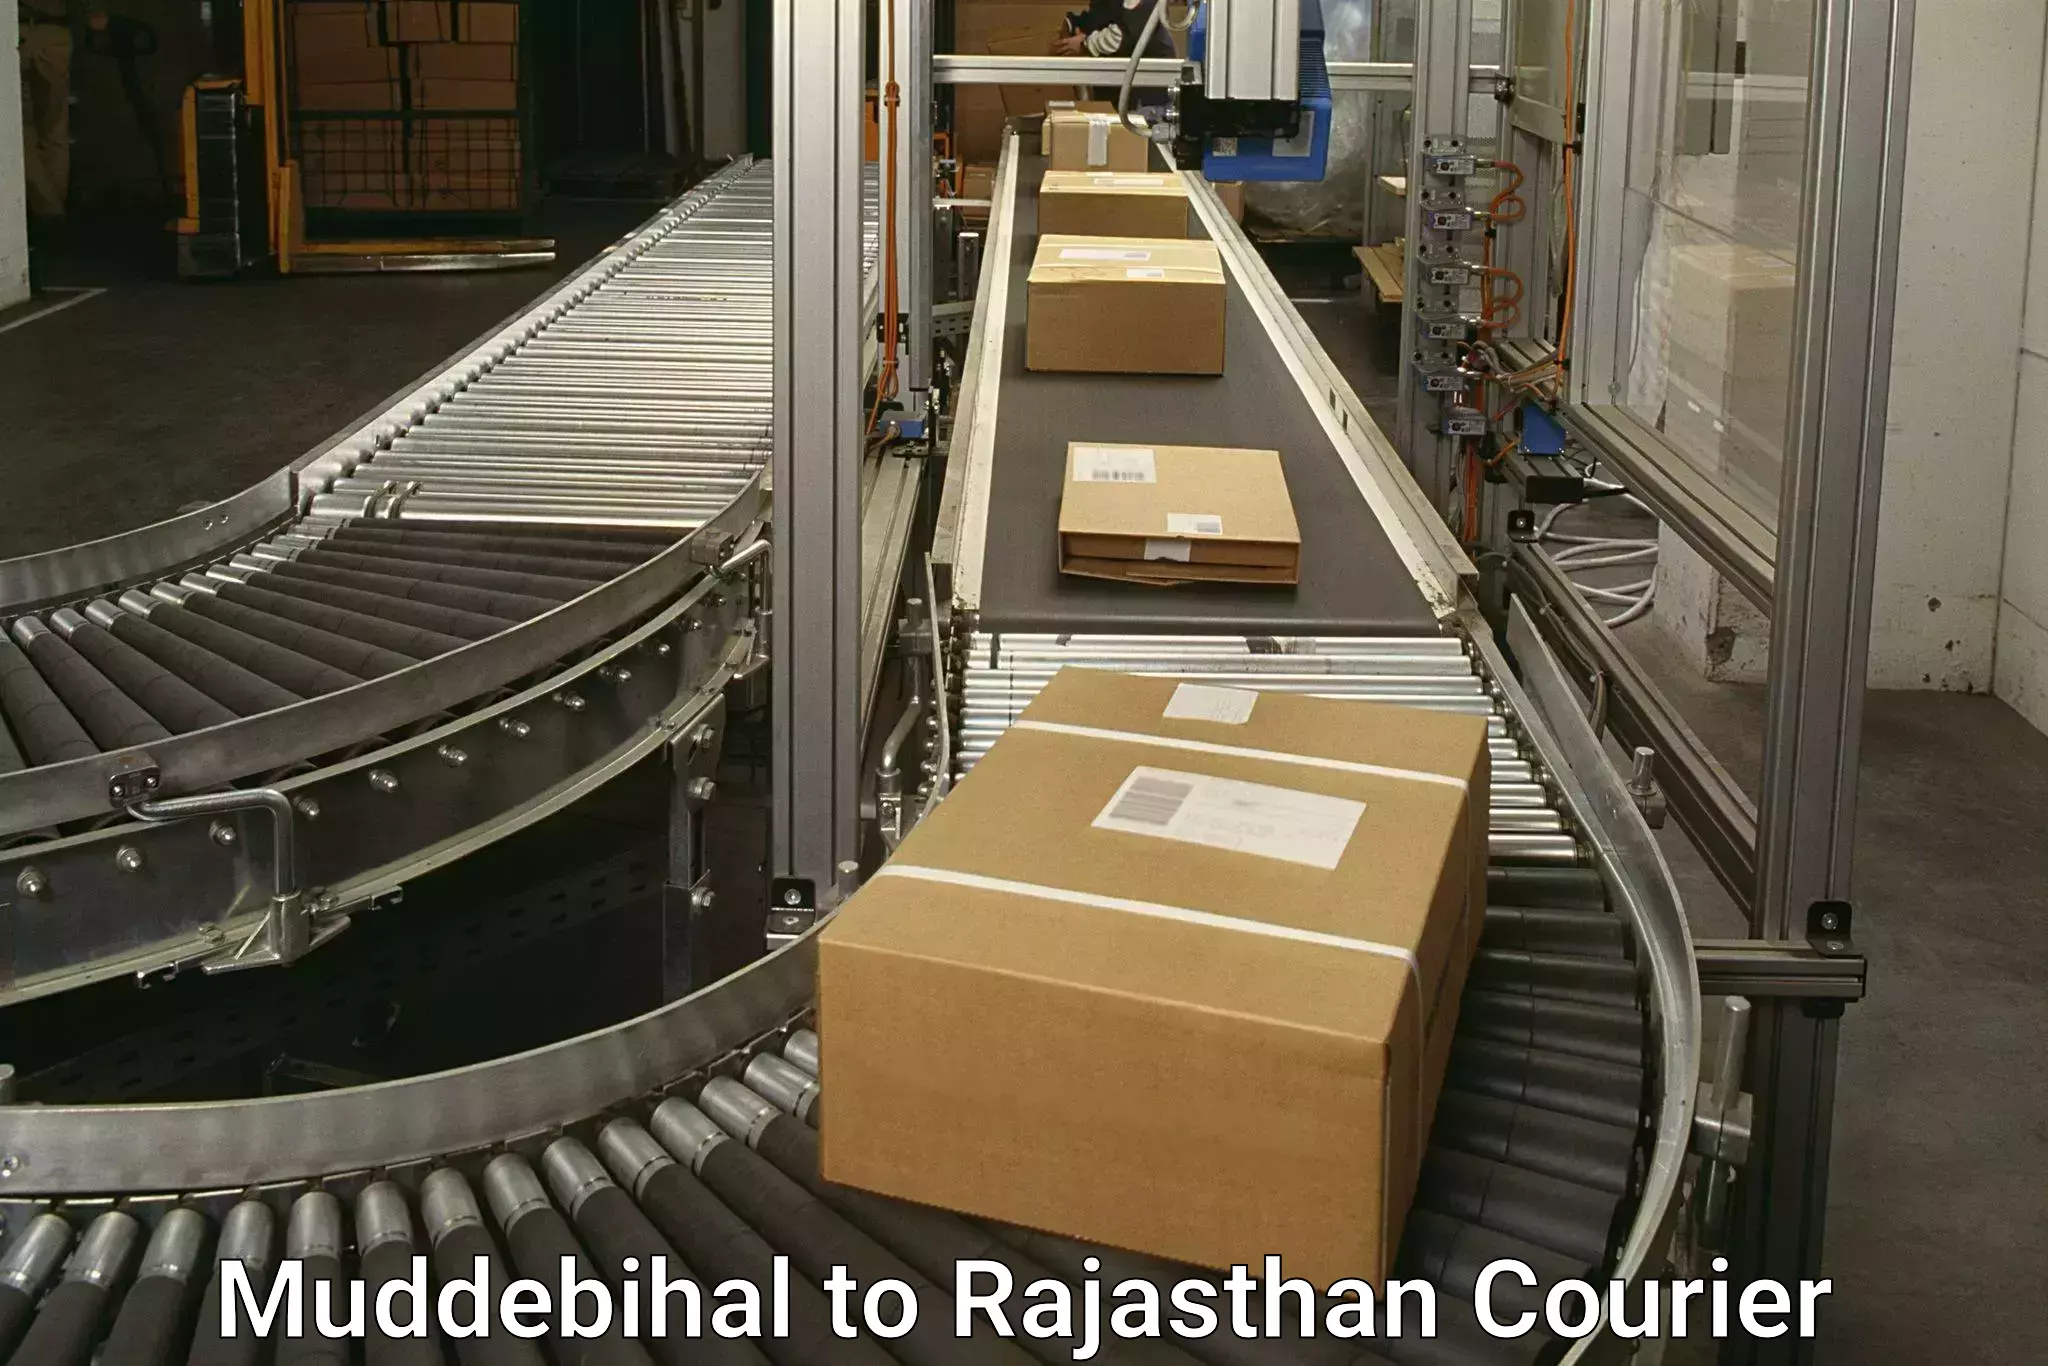 State-of-the-art courier technology Muddebihal to Rajasthan